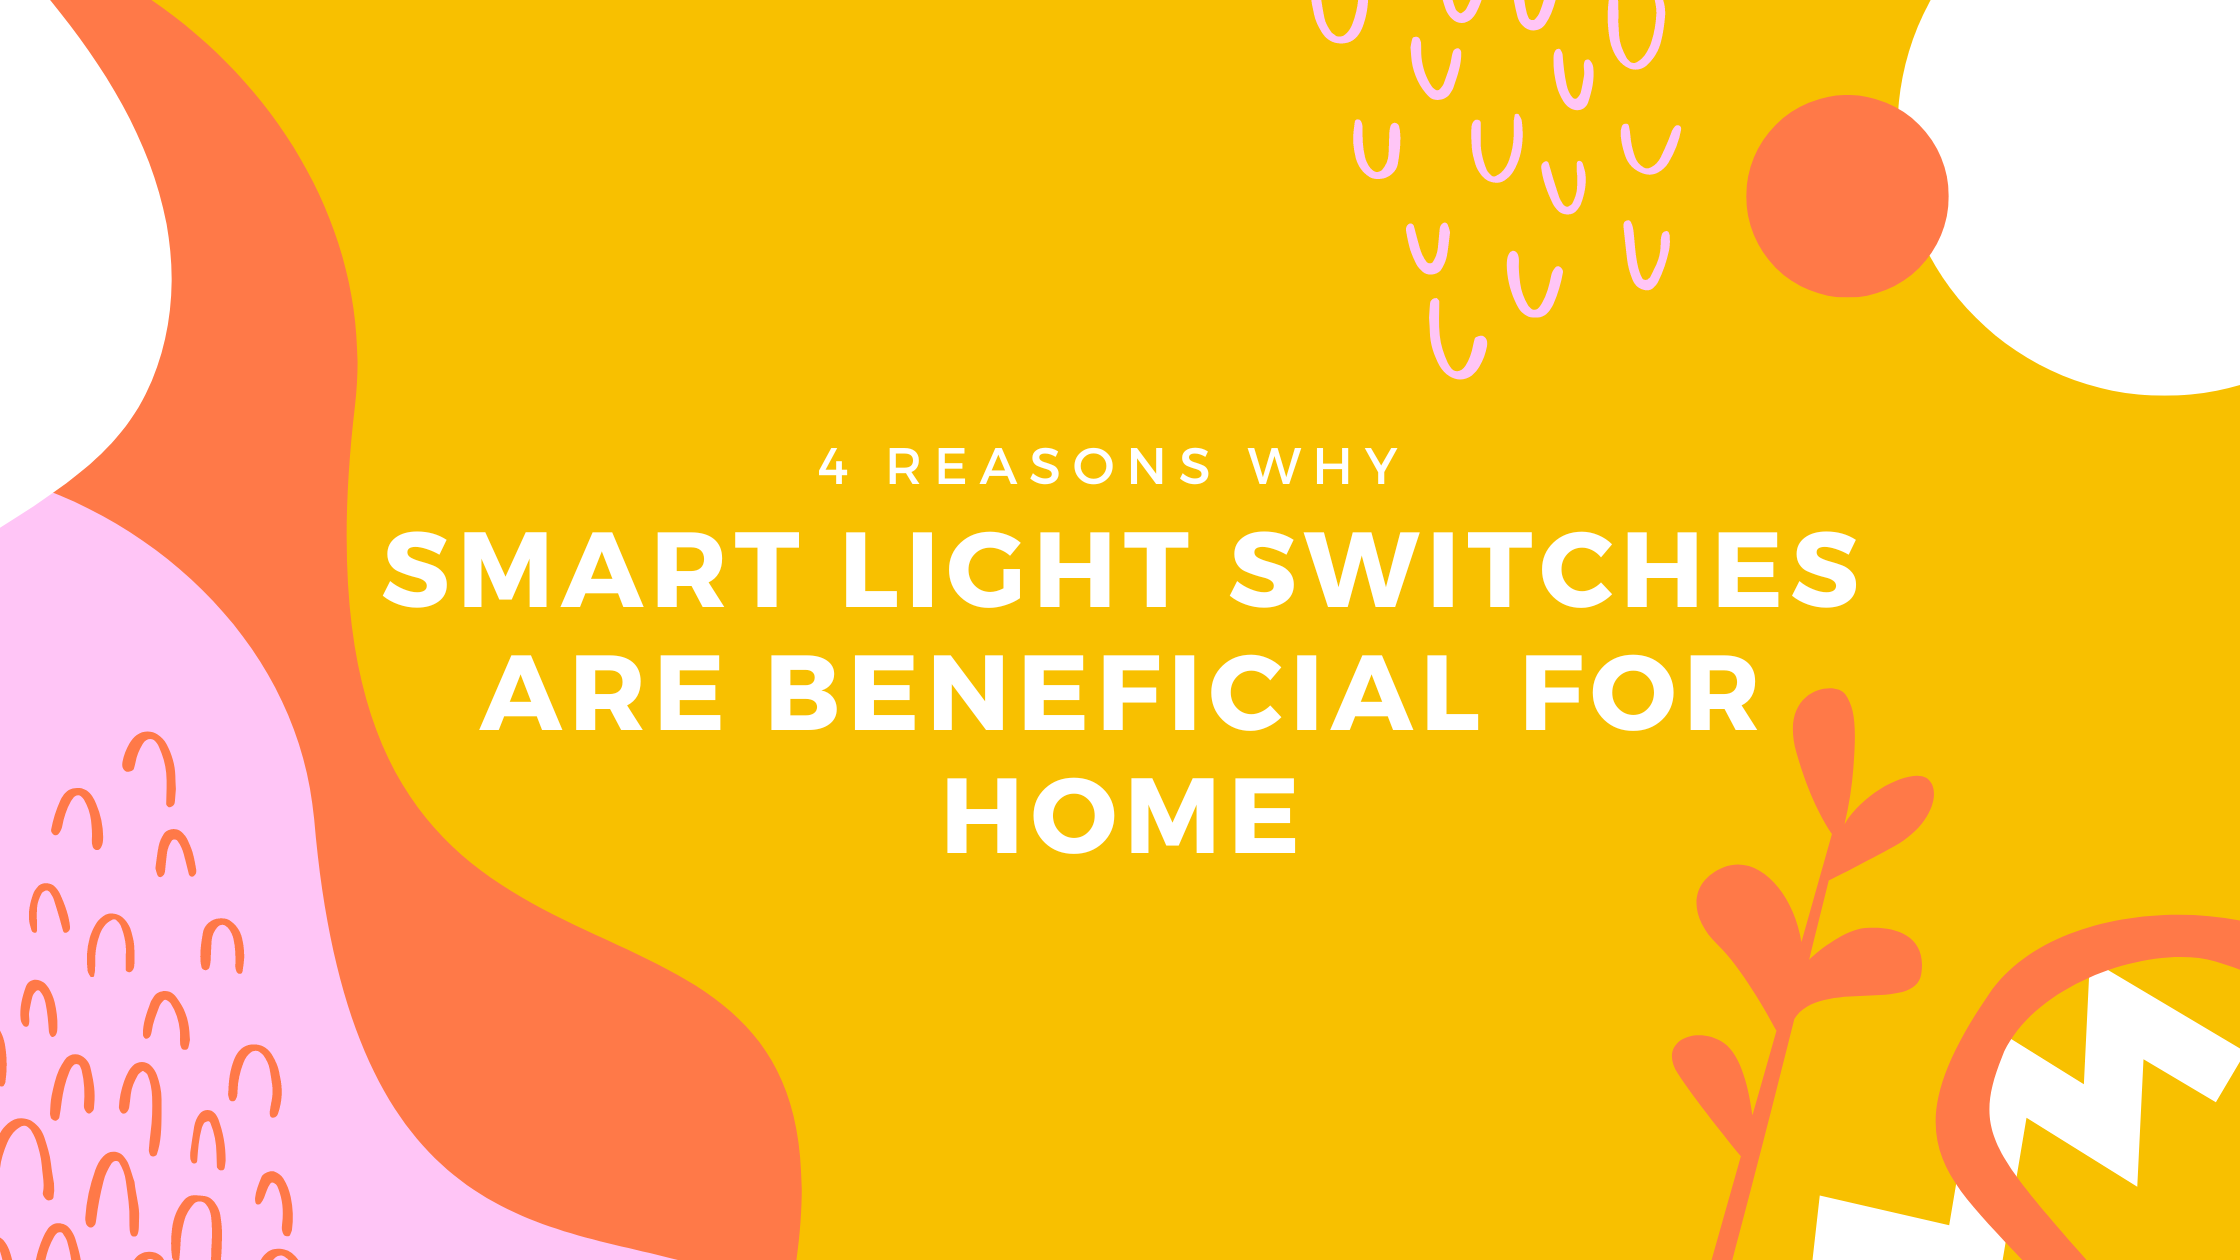 4 REASONS WHY SMART LIGHT SWITCHES ARE BENEFICIAL FOR HOME